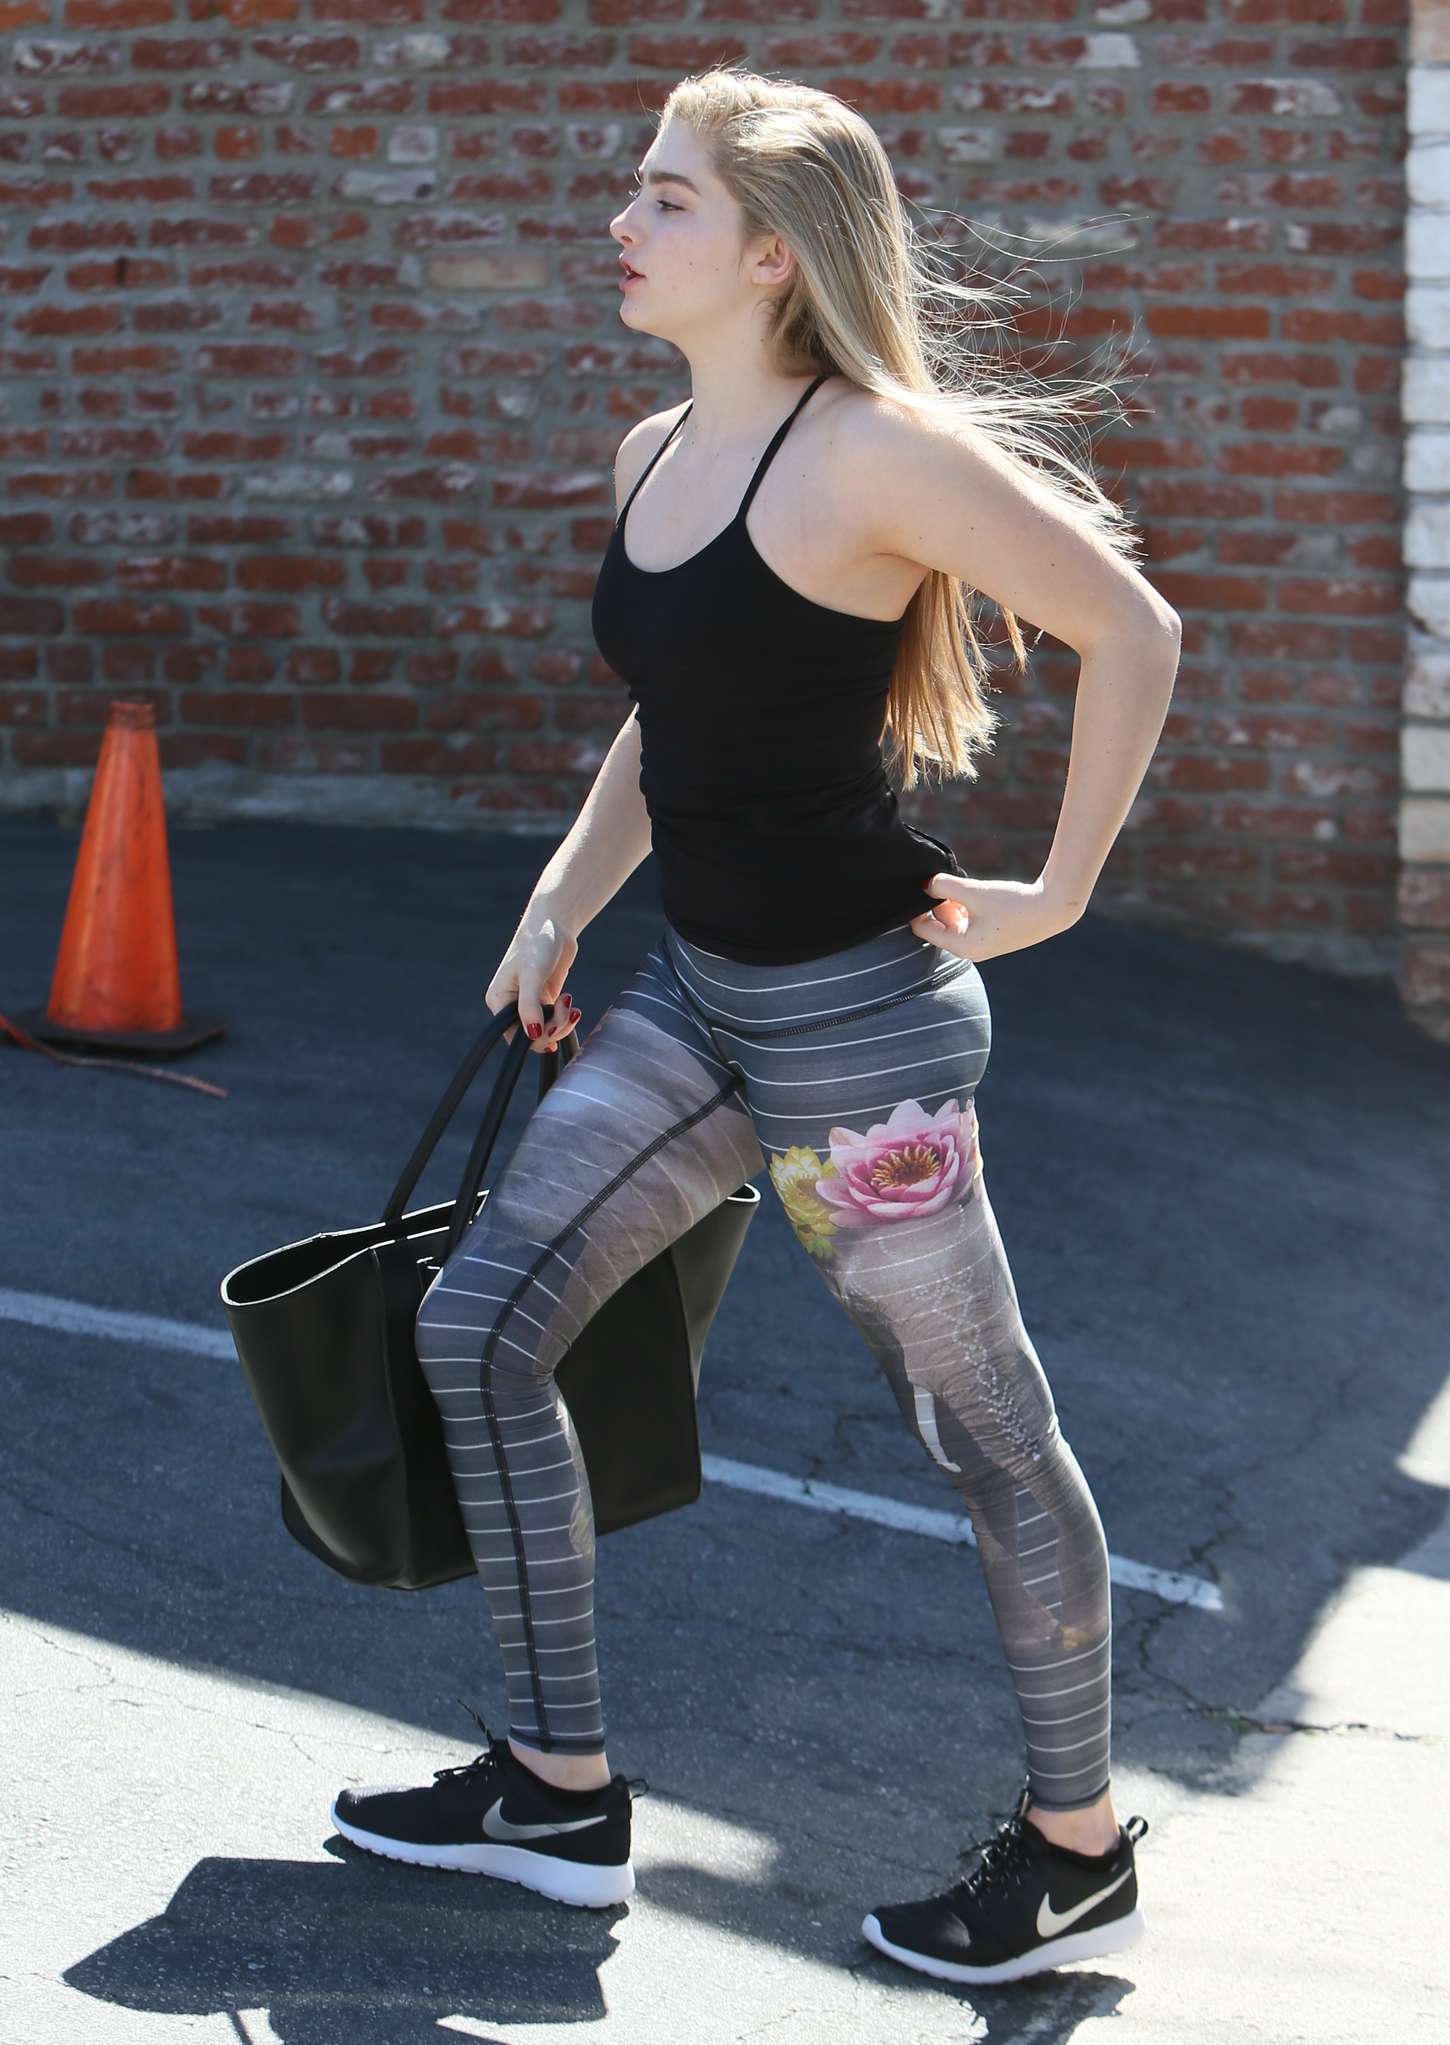 Willow Shields 2015 : Willow Shields in Tights at DWTS Rehearsal Studio -24...